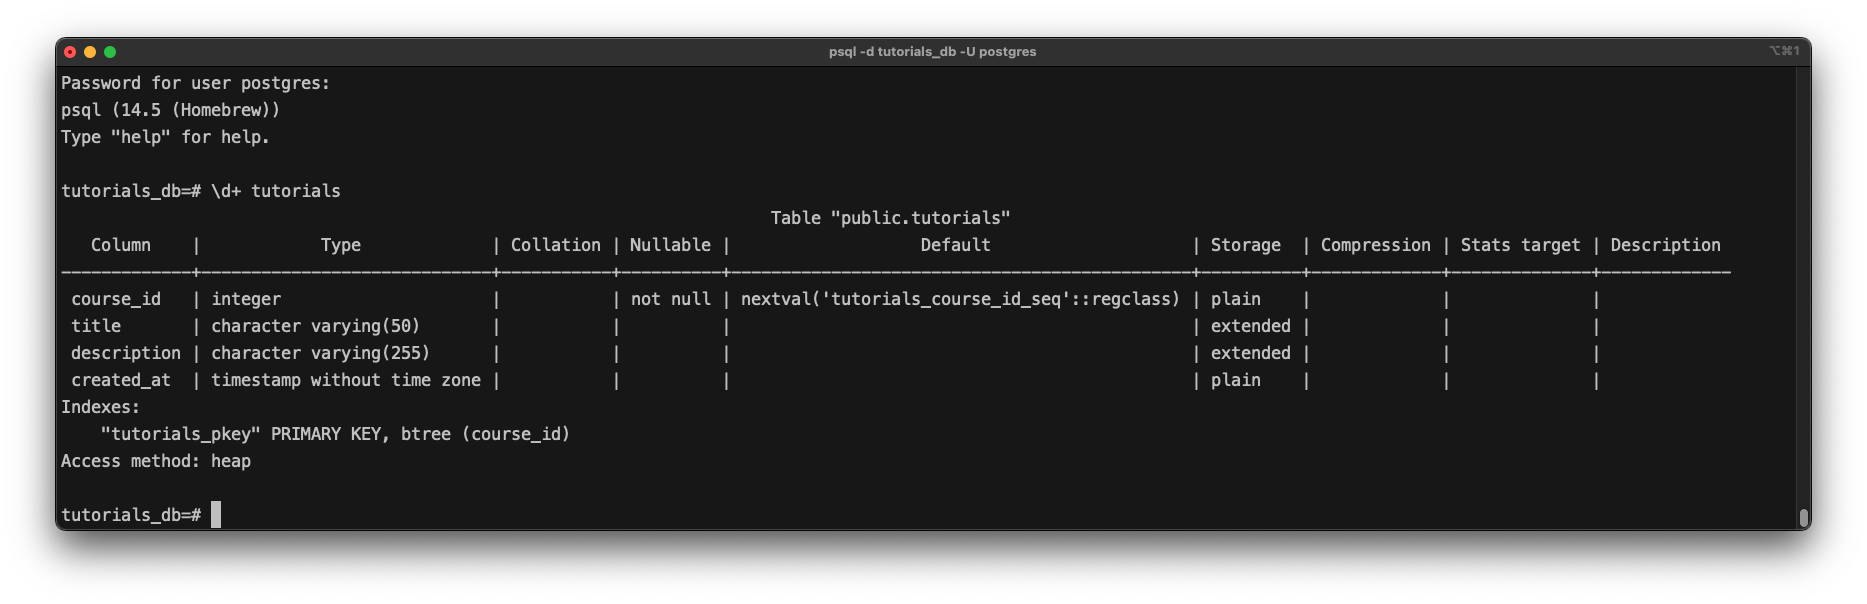 Get extra information about a table with the psql command \d+